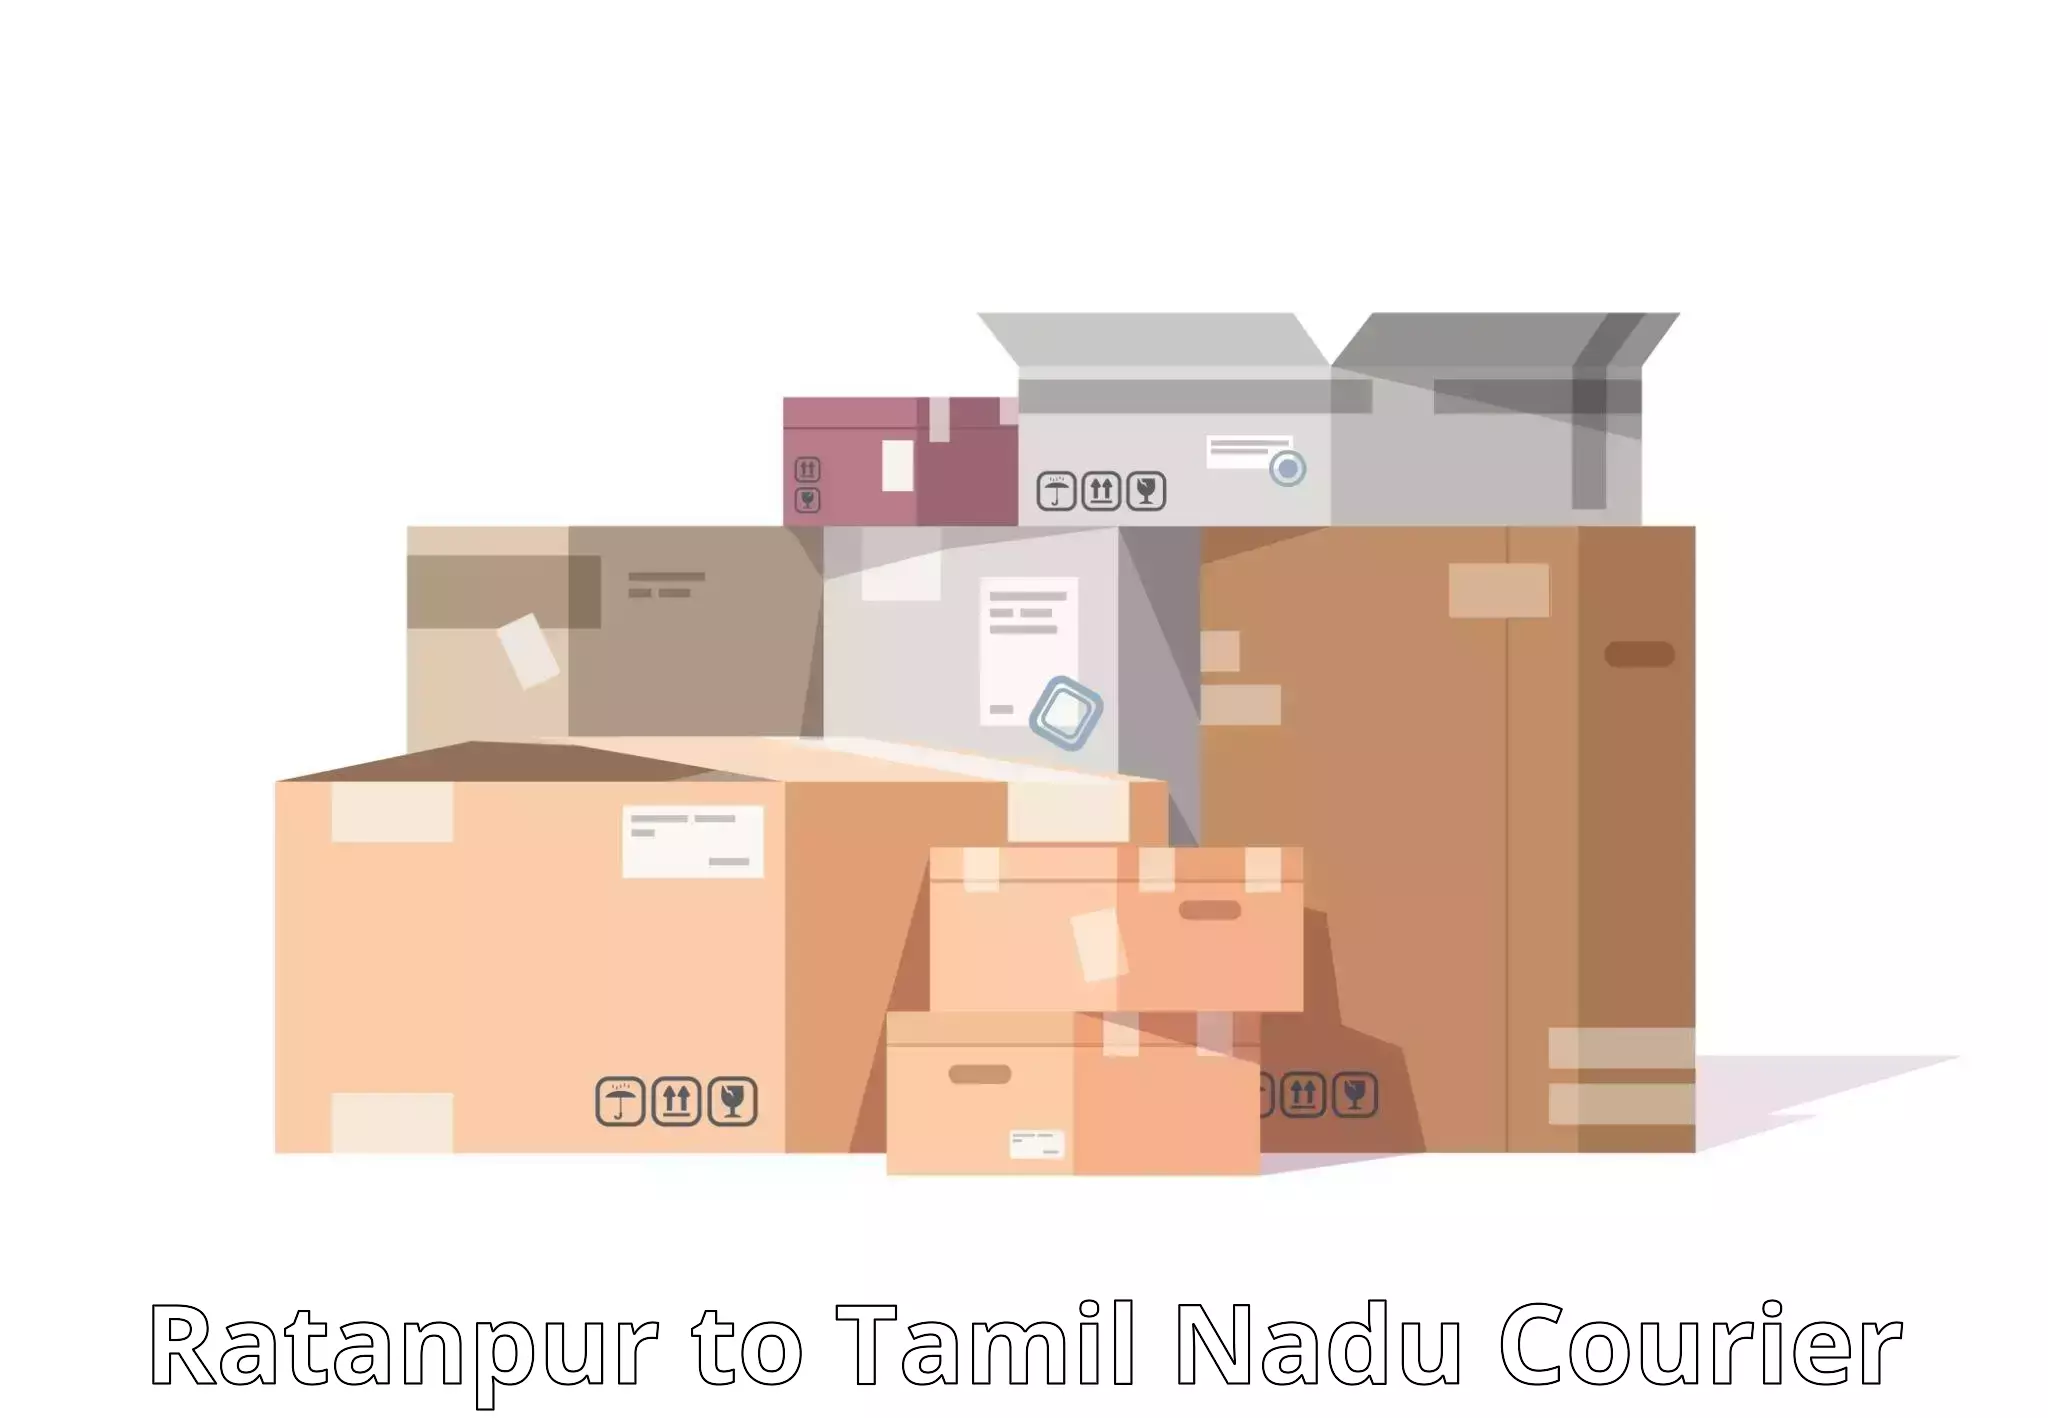 Express delivery capabilities Ratanpur to Aruppukkottai